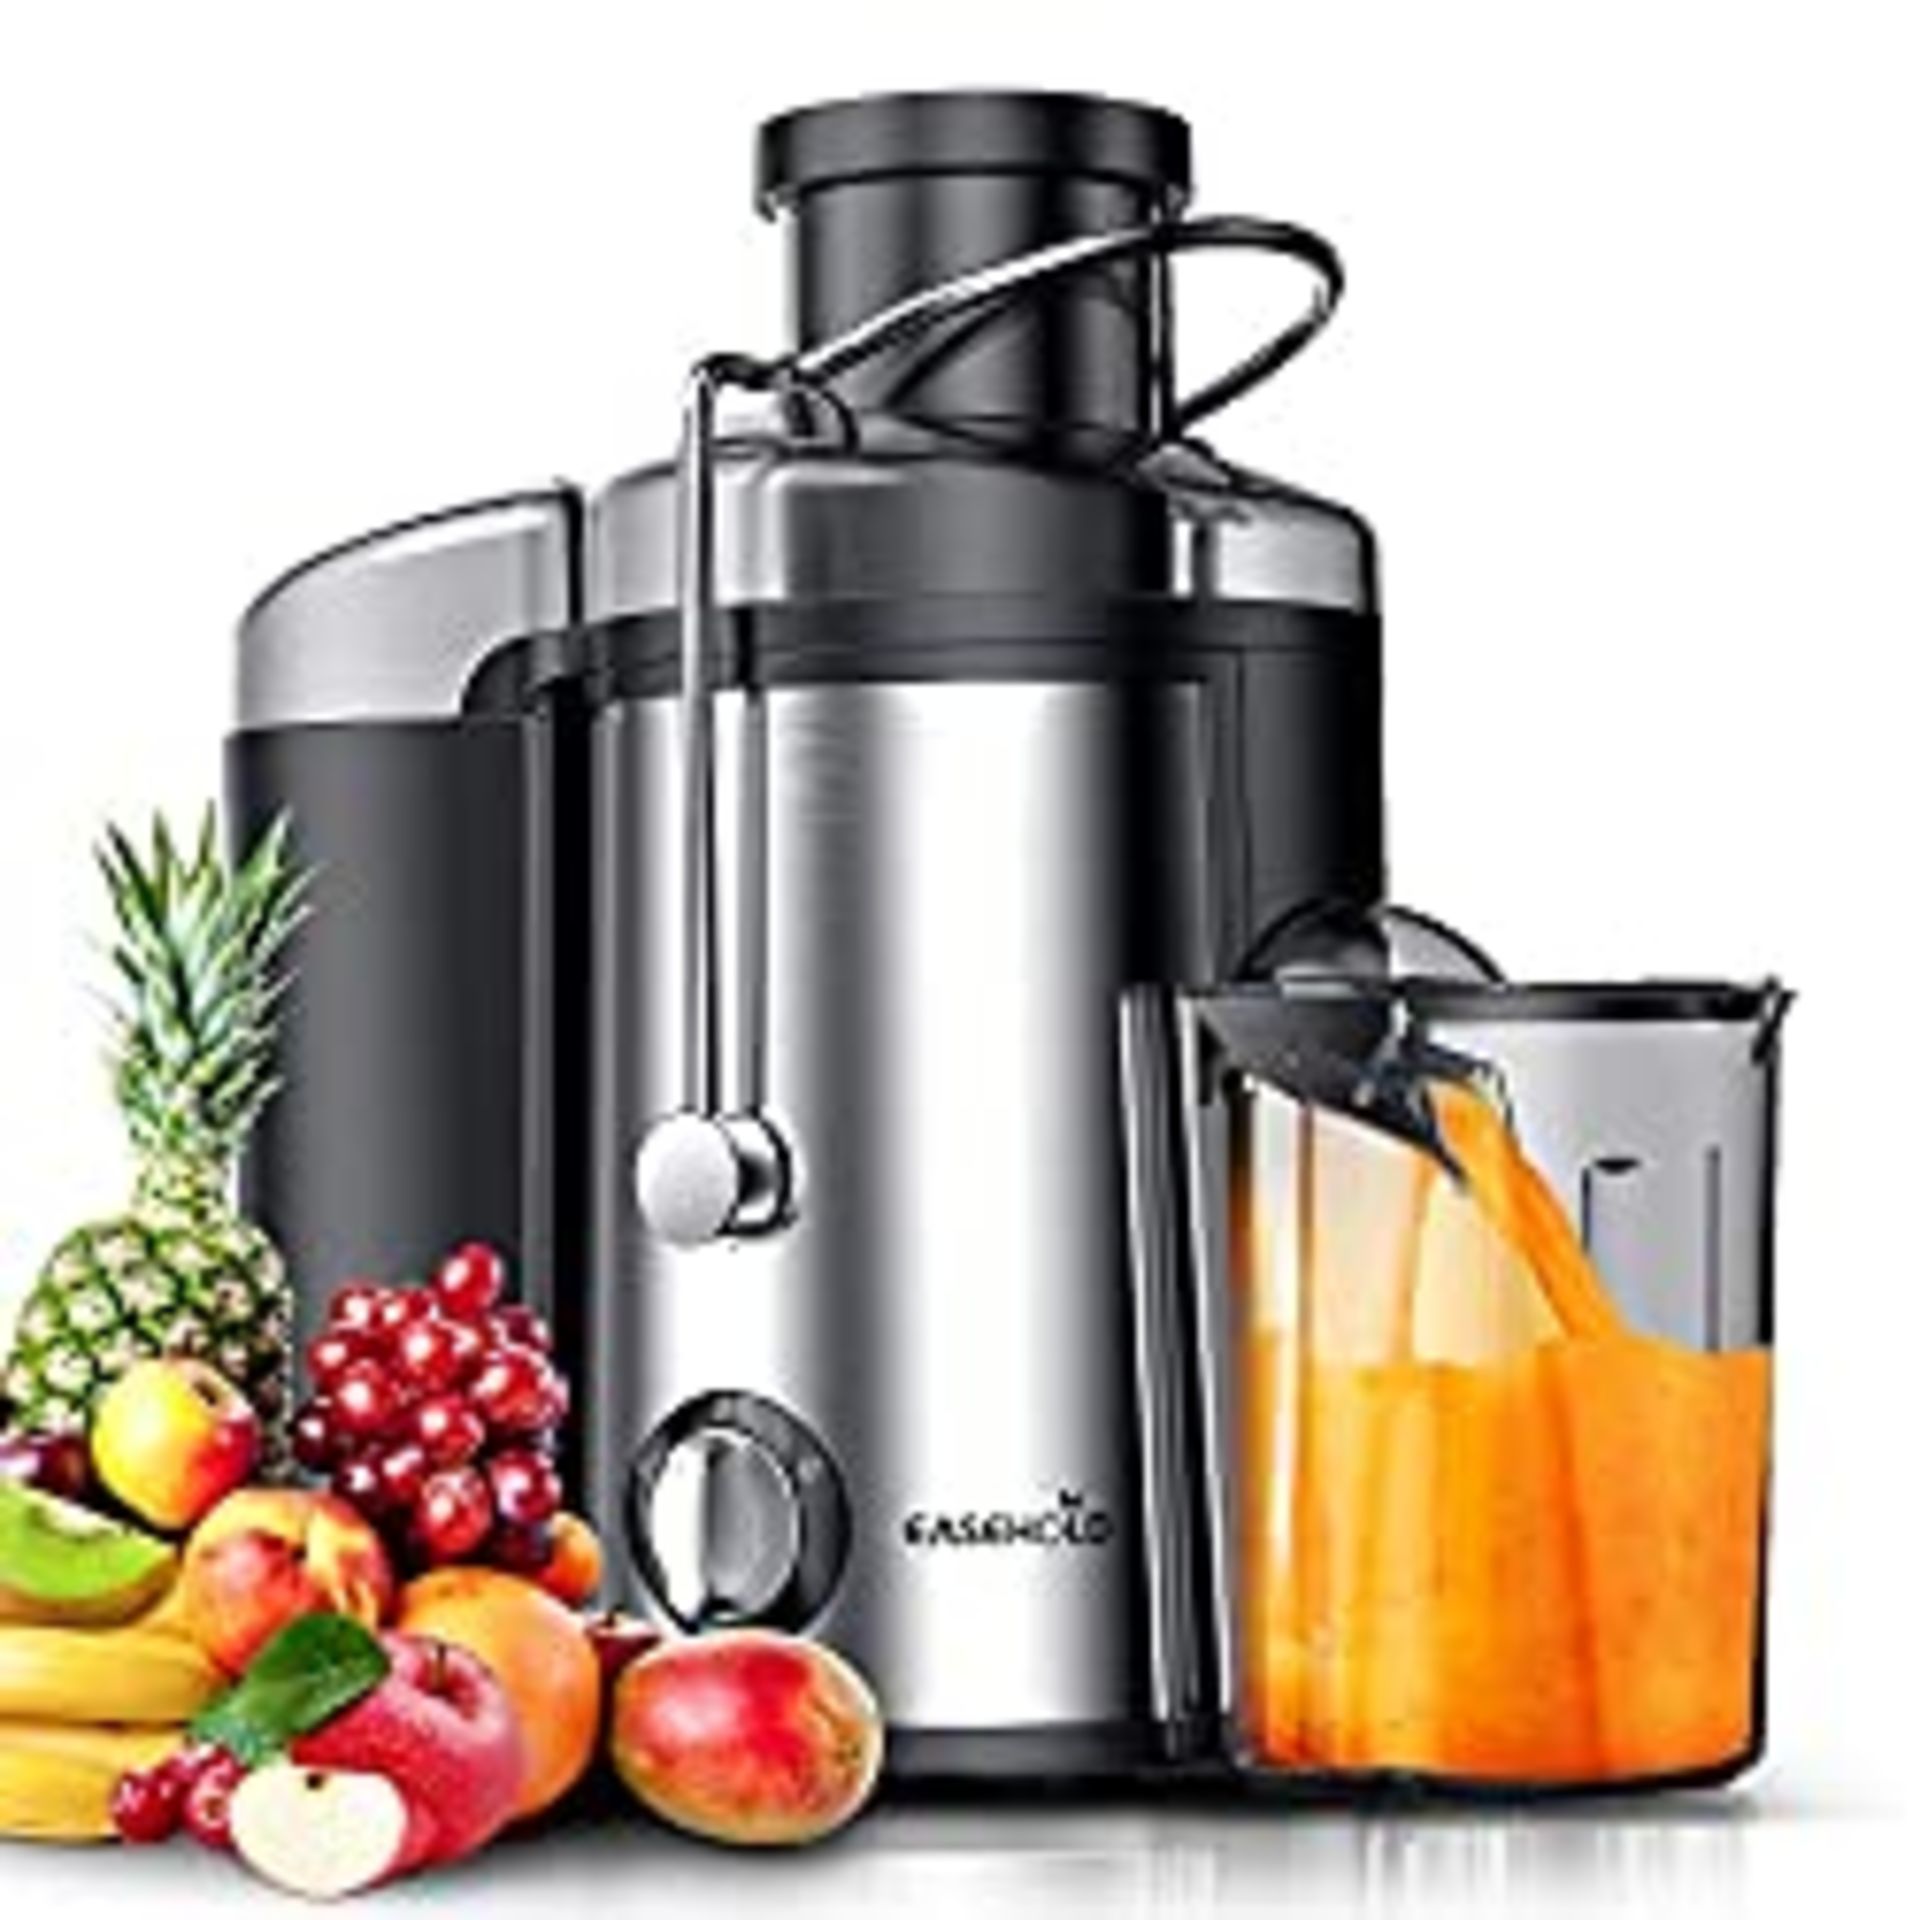 RRP £46.99 EASEHOLD Centrifugal Juicer 600W Juice Extractor Machine